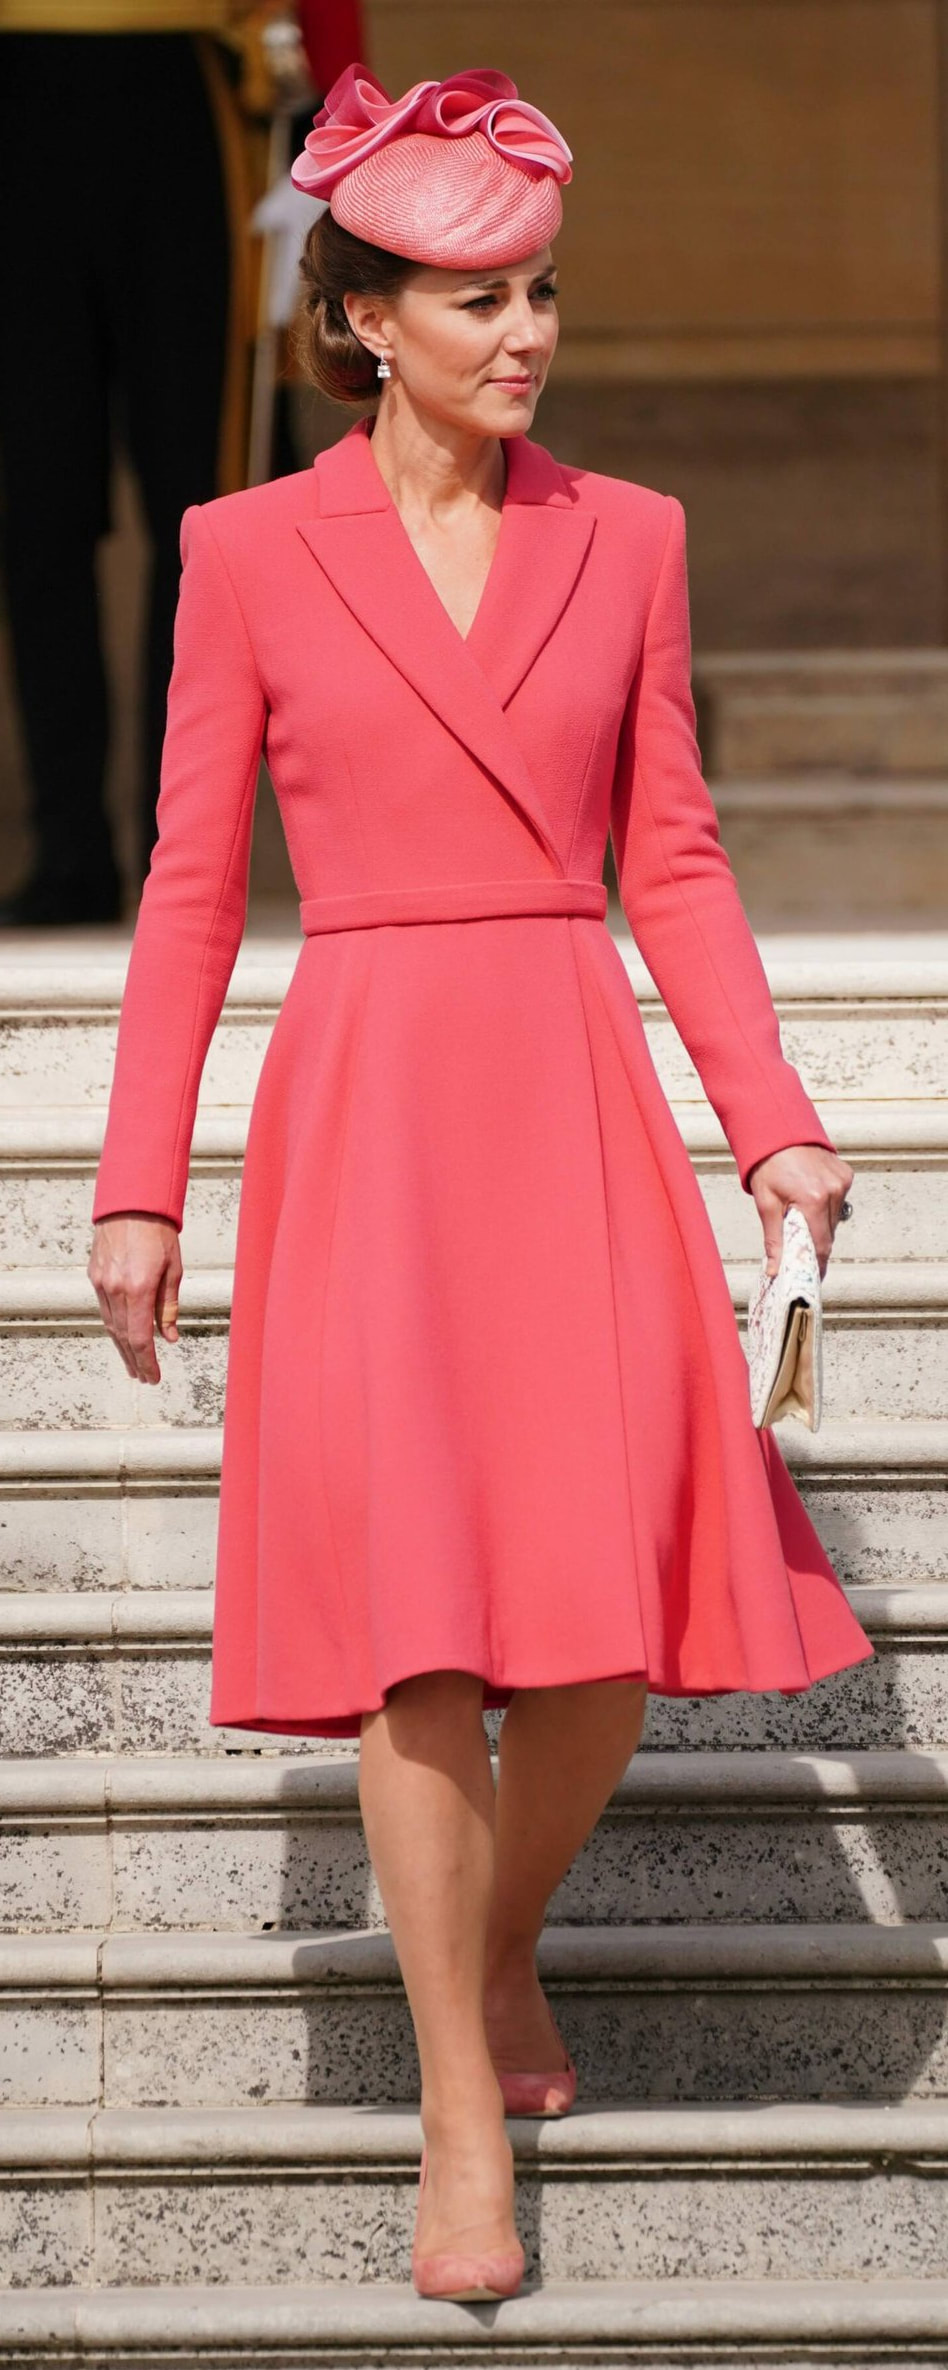 Jane Taylor Lyssa Straw Hat in Pink as seen on Kate Middleton, The Duchess of Cambridge.